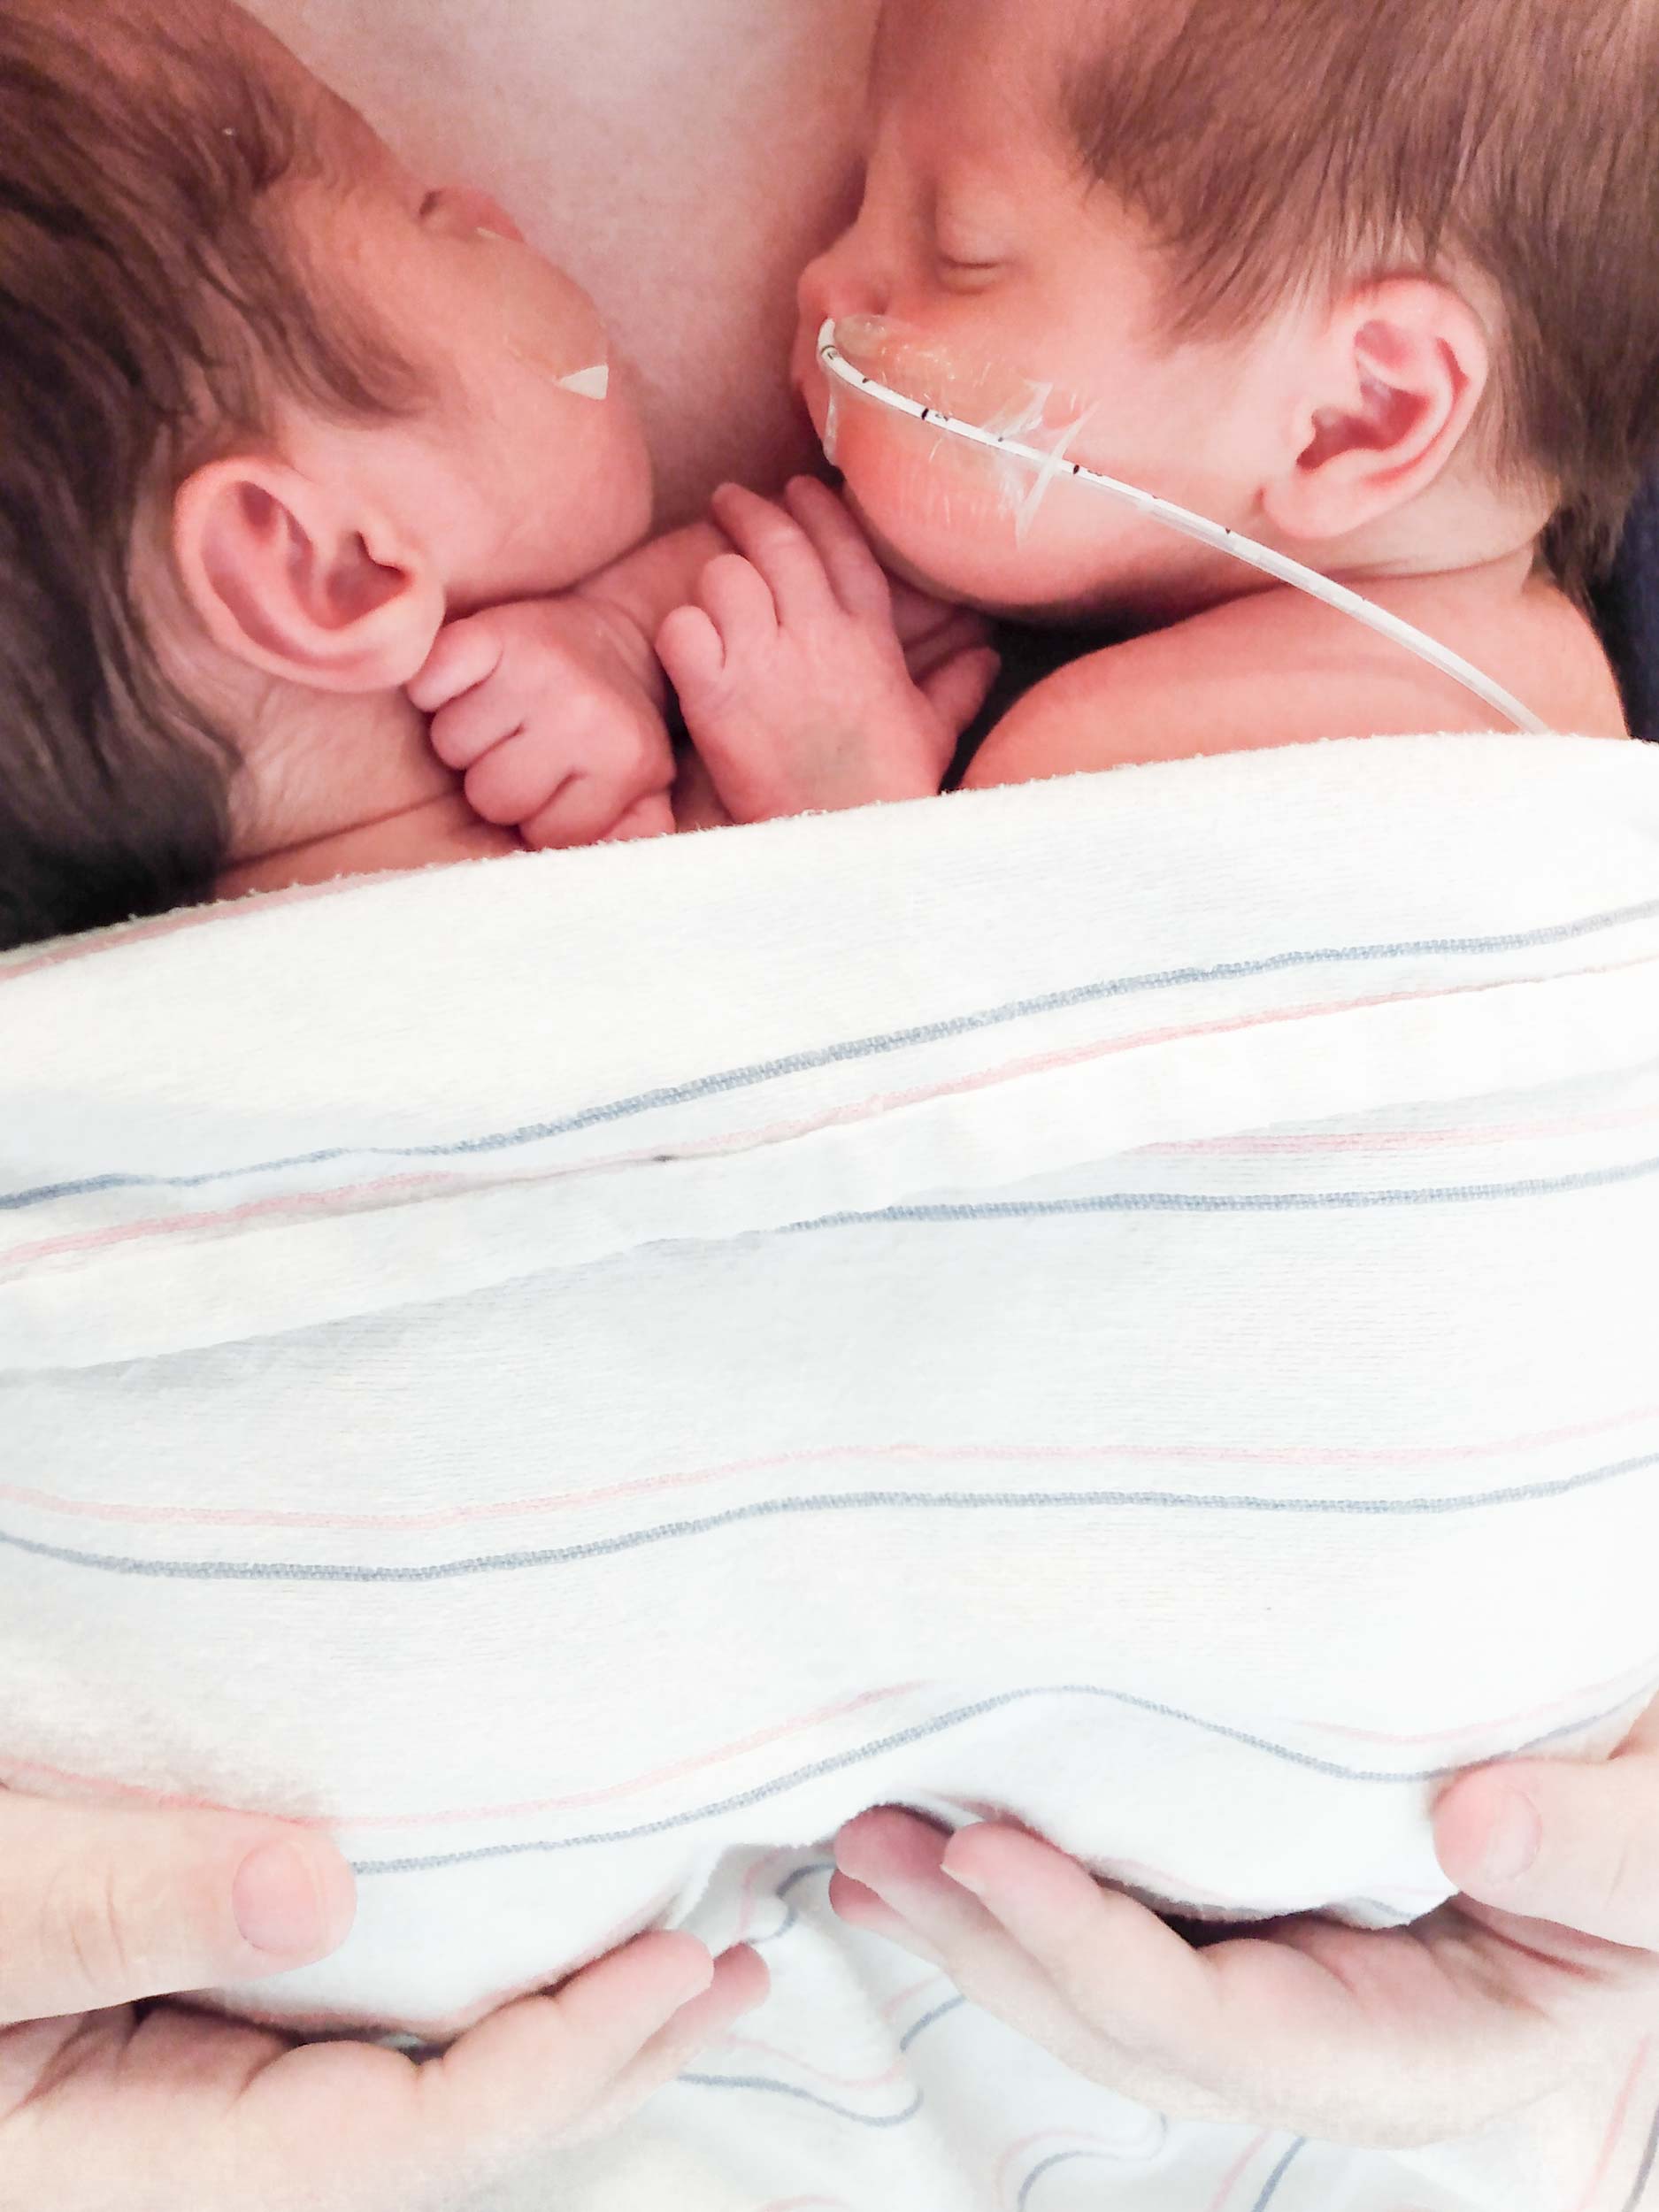 Newborn twins with tubes in their nose are sleeping closely on their mother's chest and being supported by her hands under a hospital baby blanket.